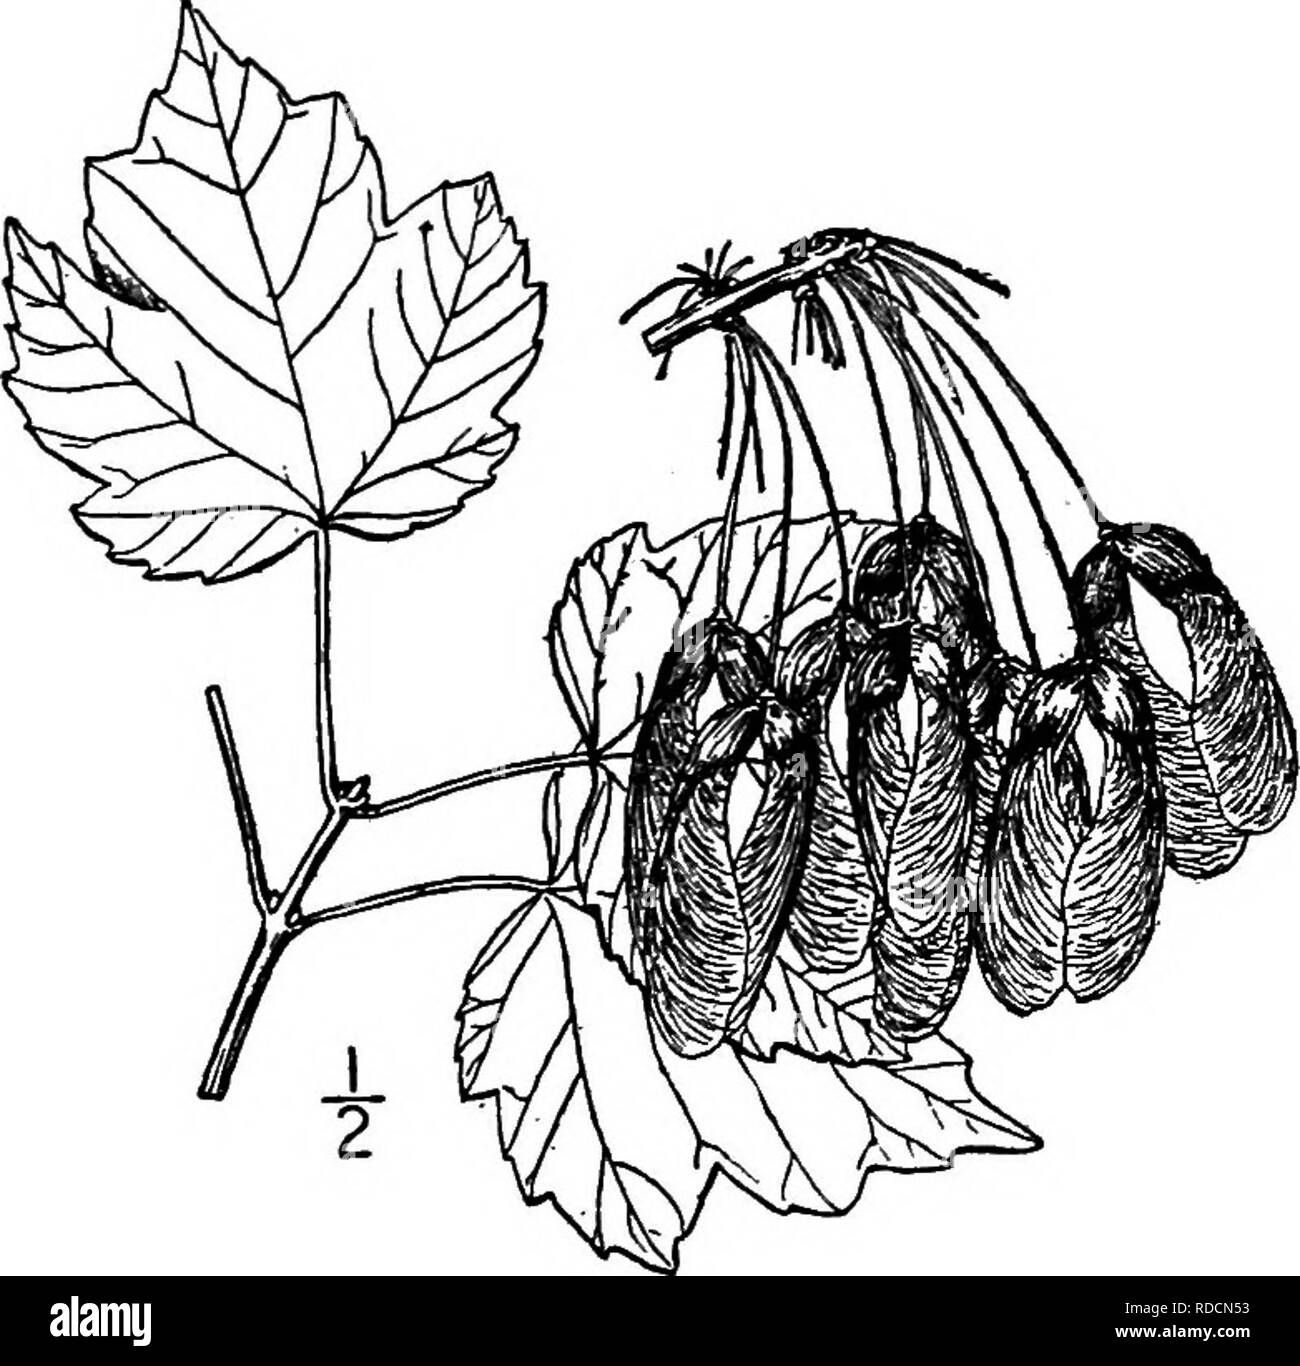 . North American trees : being descriptions and illustrations of the trees growing independently of cultivation in North America, north of Mexico and the West Indies . Trees. 648 The Maples and 3 to 5 mm. wide, slightly curved, the seed-bearing part about 5 mm. long and very strongly striate. II. CAROLINA MAPLE—Acer caroliniannm Walter Acer microphyllum Pax. Acer tomentosum Pax 1 While closely related to the Red maple, this tree of the southern United States differs from it so markedly as to warrant its recognition as a species. In New Jersey, where both forms oc- cur, there is no difficulty i Stock Photo